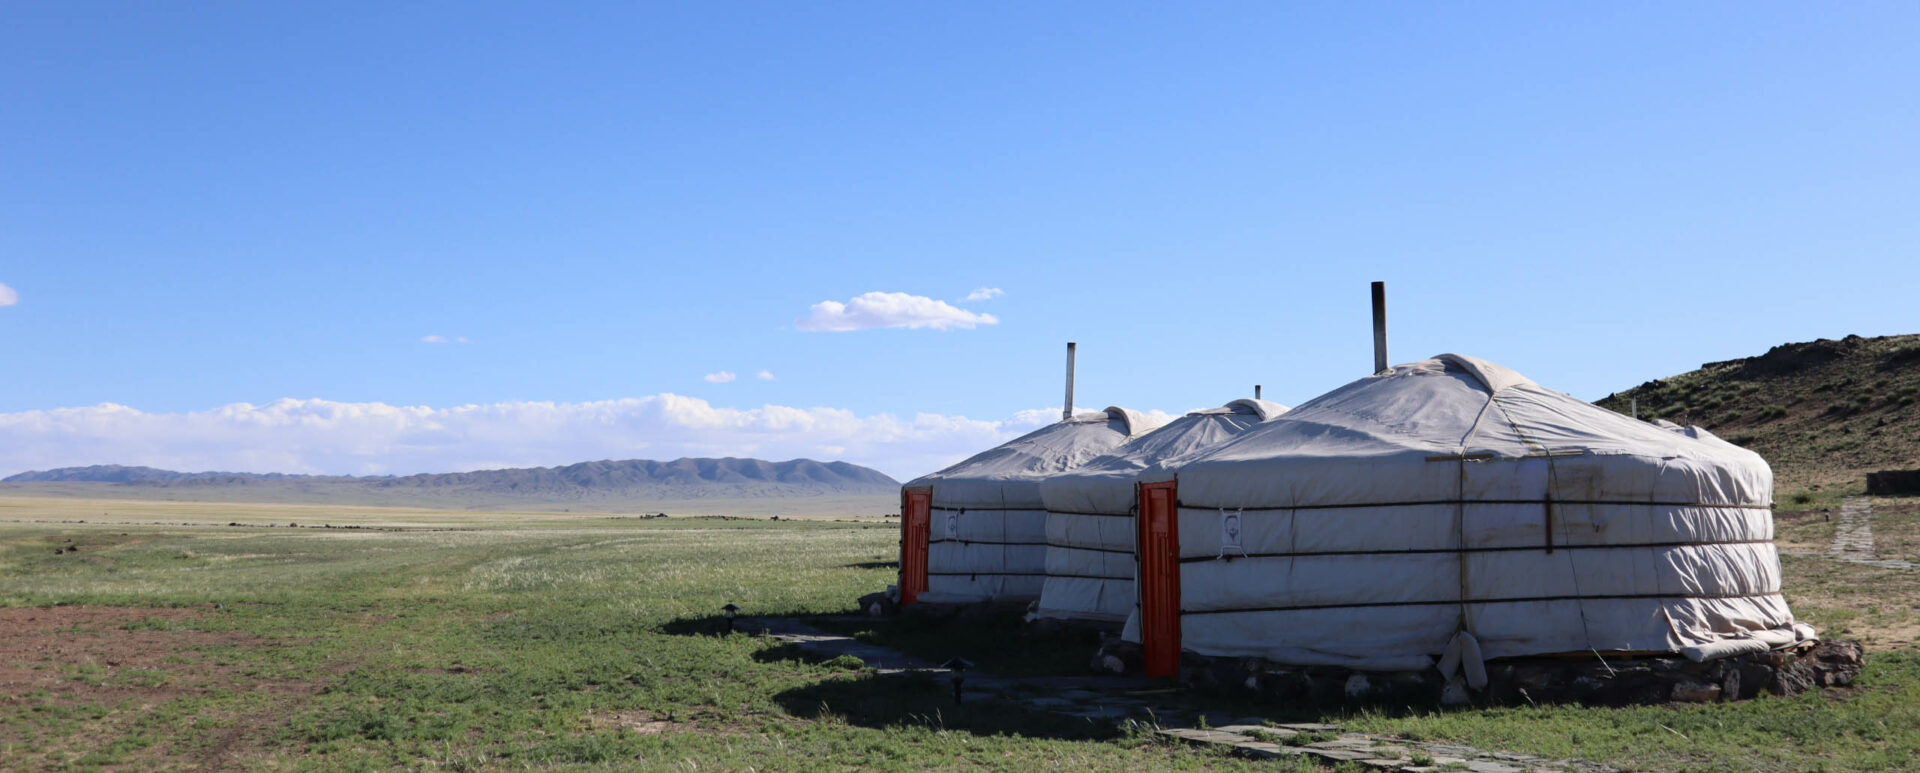 Our Stay At Three Camel Lodge, Mongolia